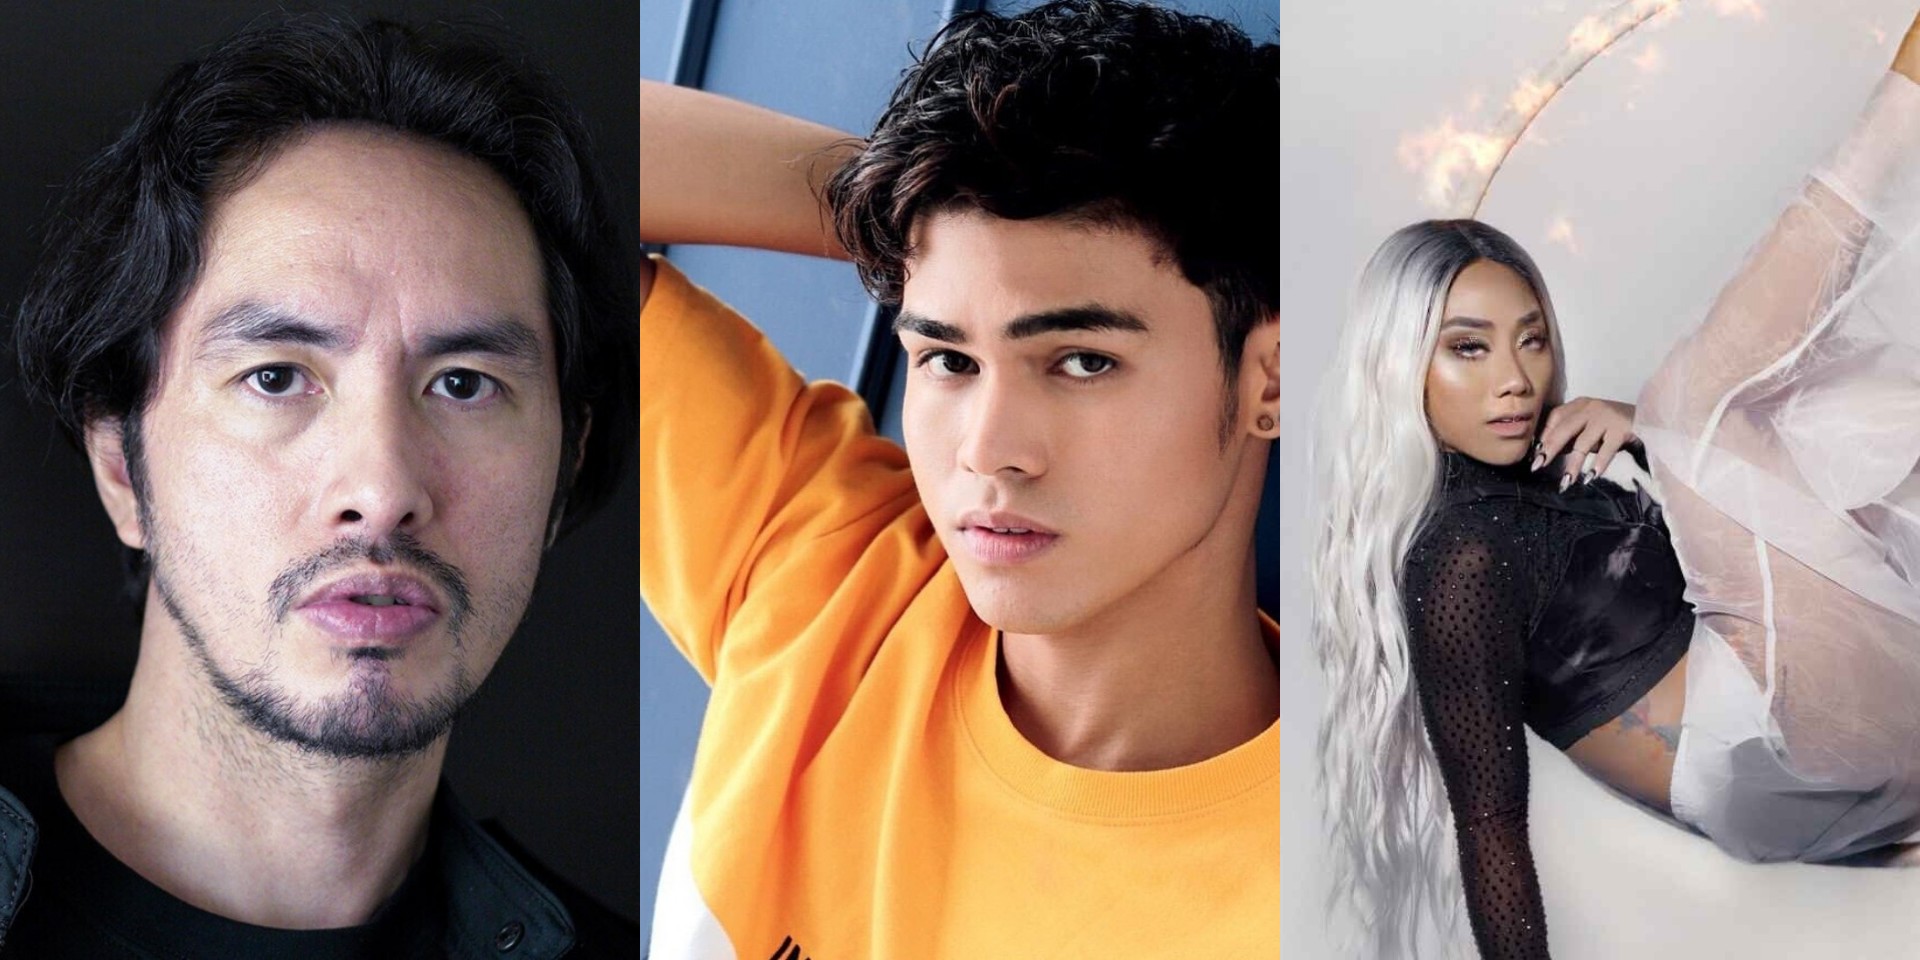 Rico Blanco, Iñigo Pascual, RRILEY and more - here's are a list of musicians to follow on TikTok